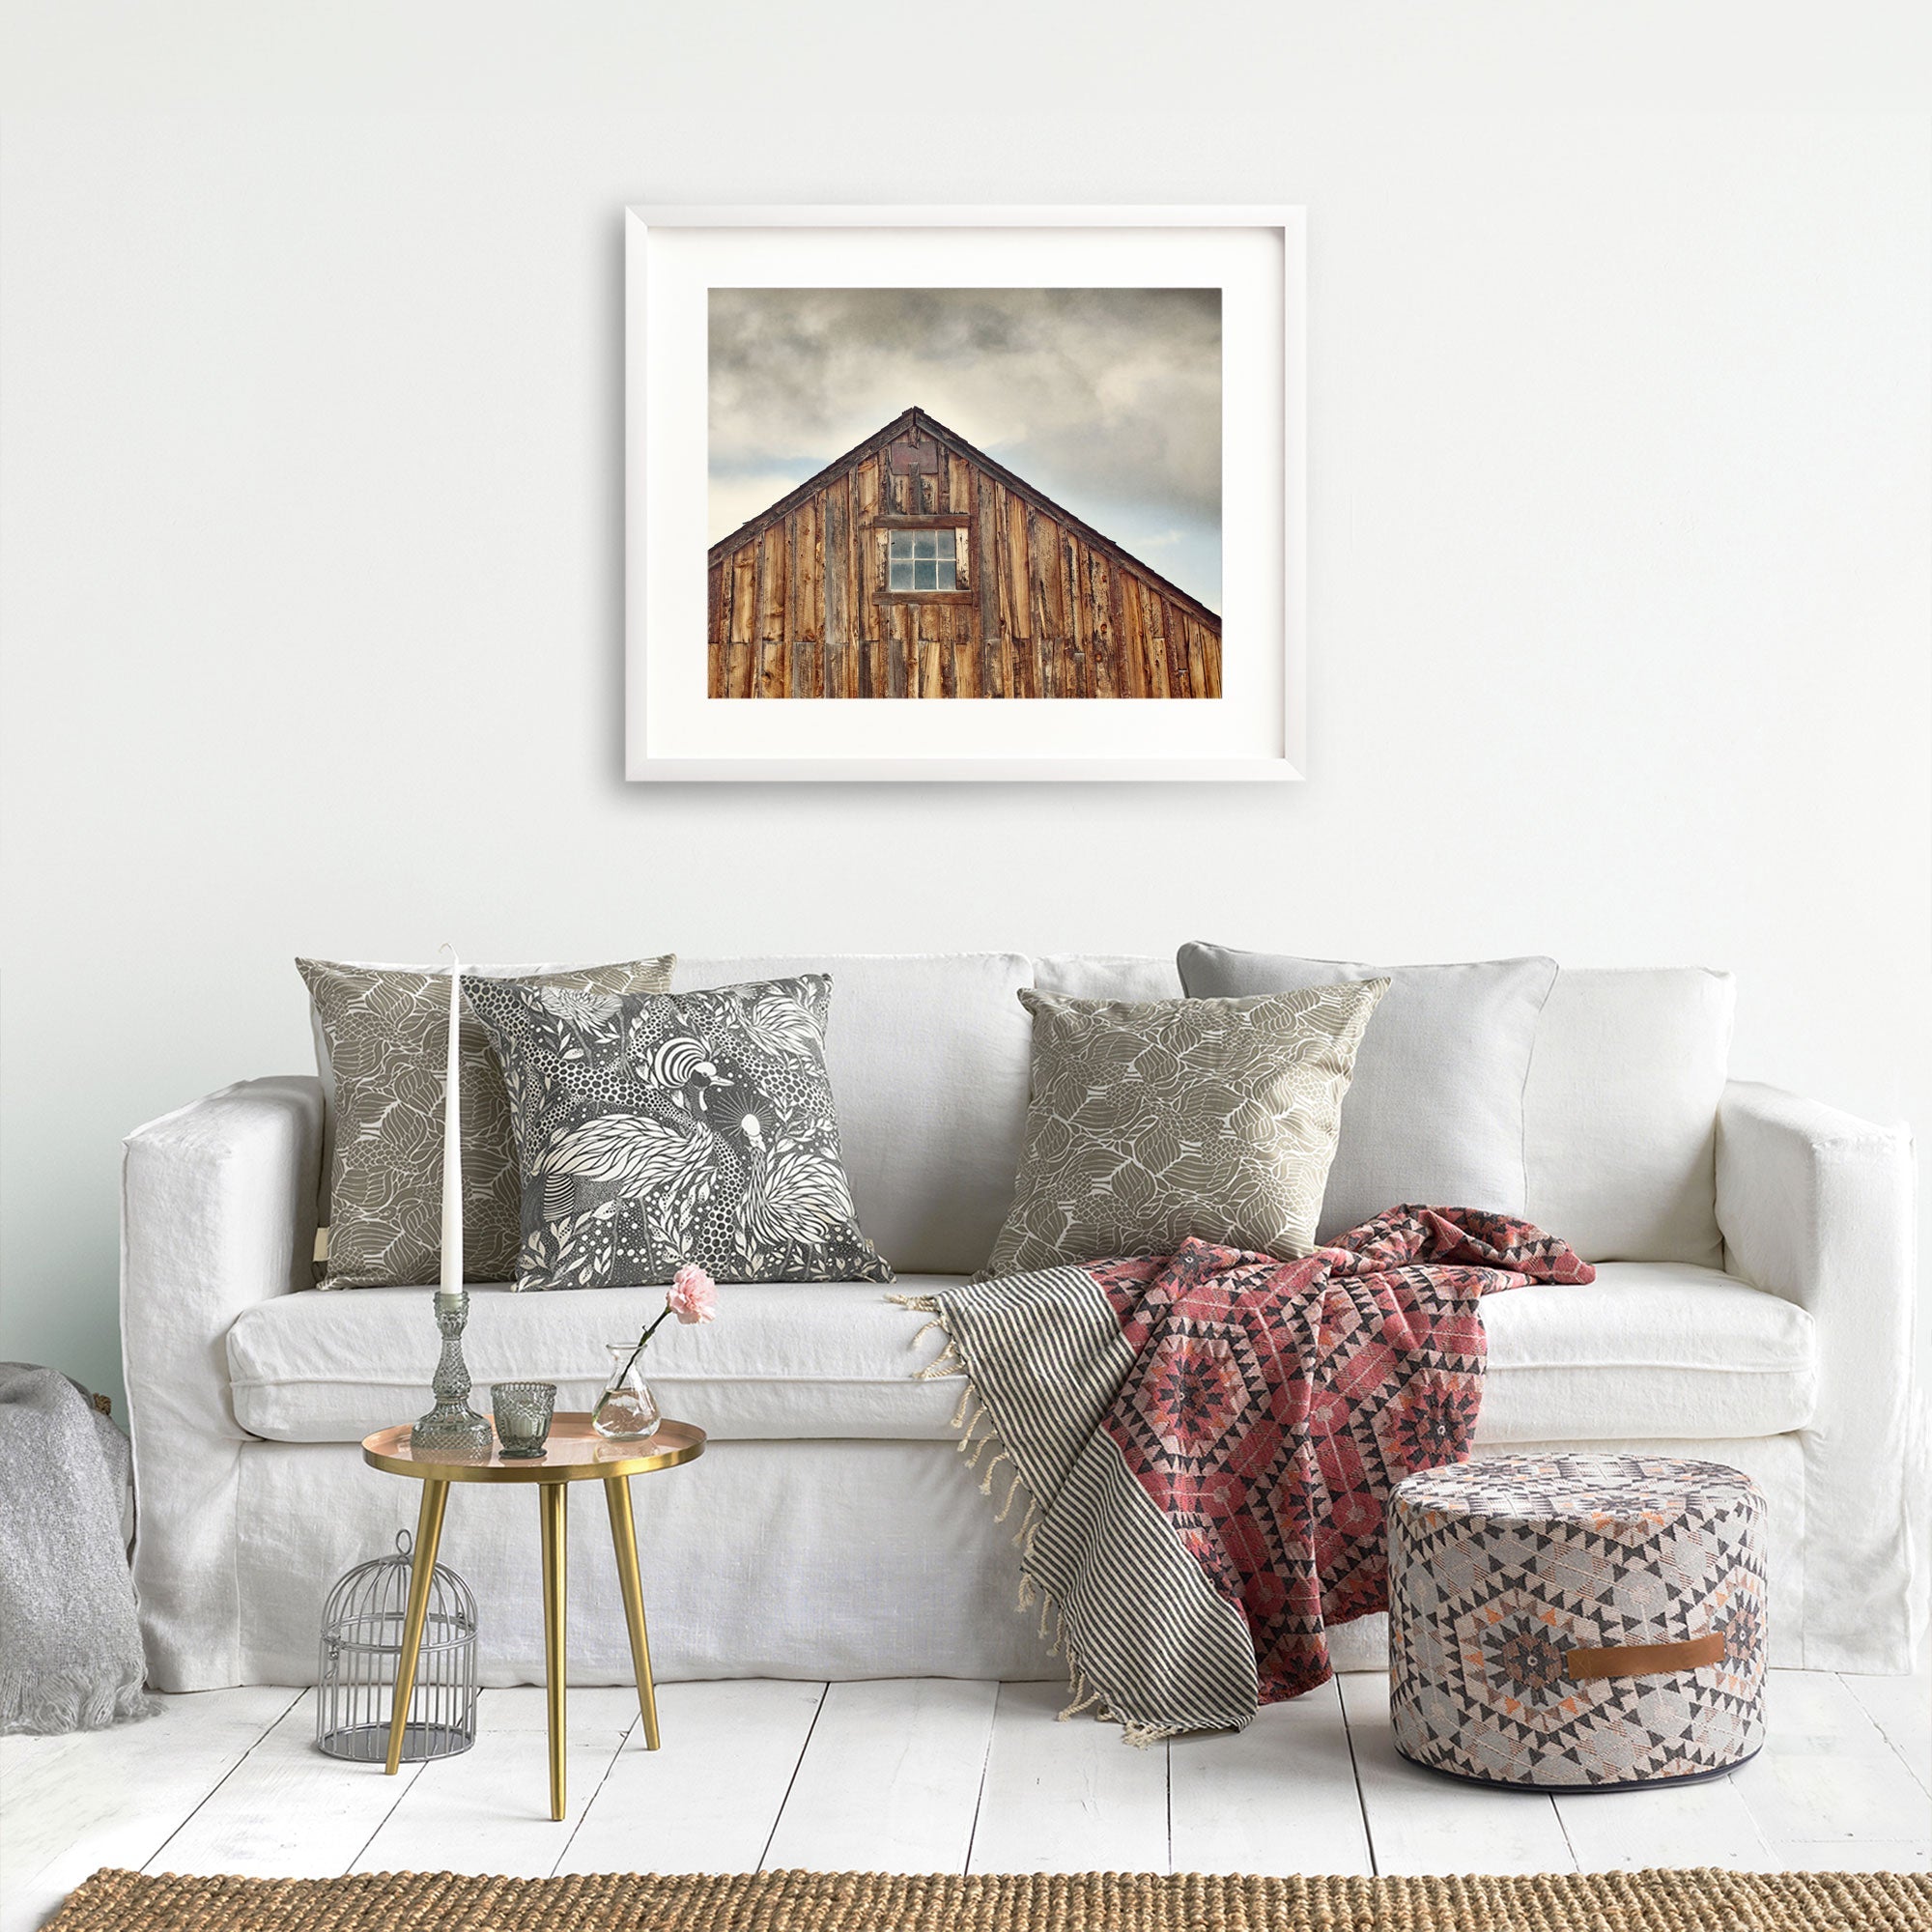 A cozy living room featuring a white sofa adorned with patterned throw pillows, a red and grey blanket, and a small round table with decorative items. Above the sofa, a framed photo of the Offley Green Farmhouse Rustic Print, 'Old Barn at Bodie'.